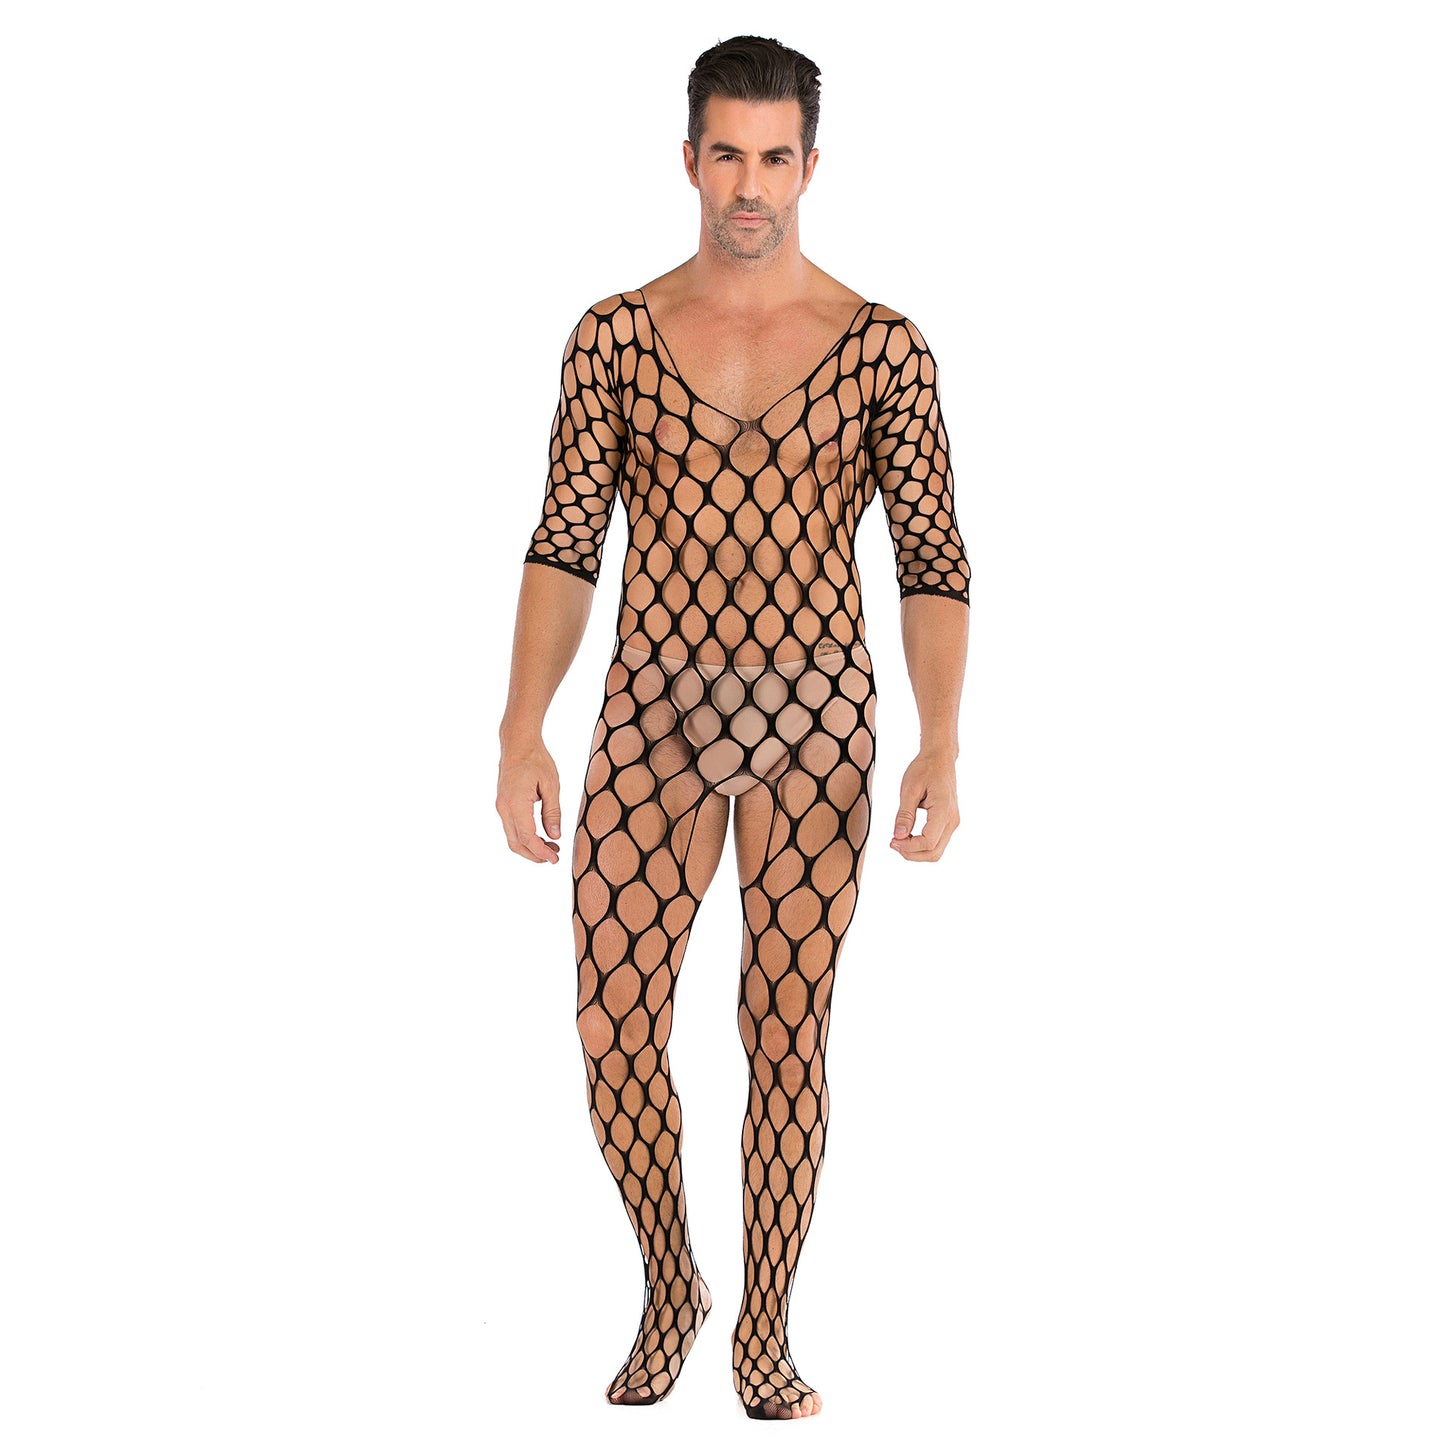 Men's Sexy Hollow Out Black One-piece Net